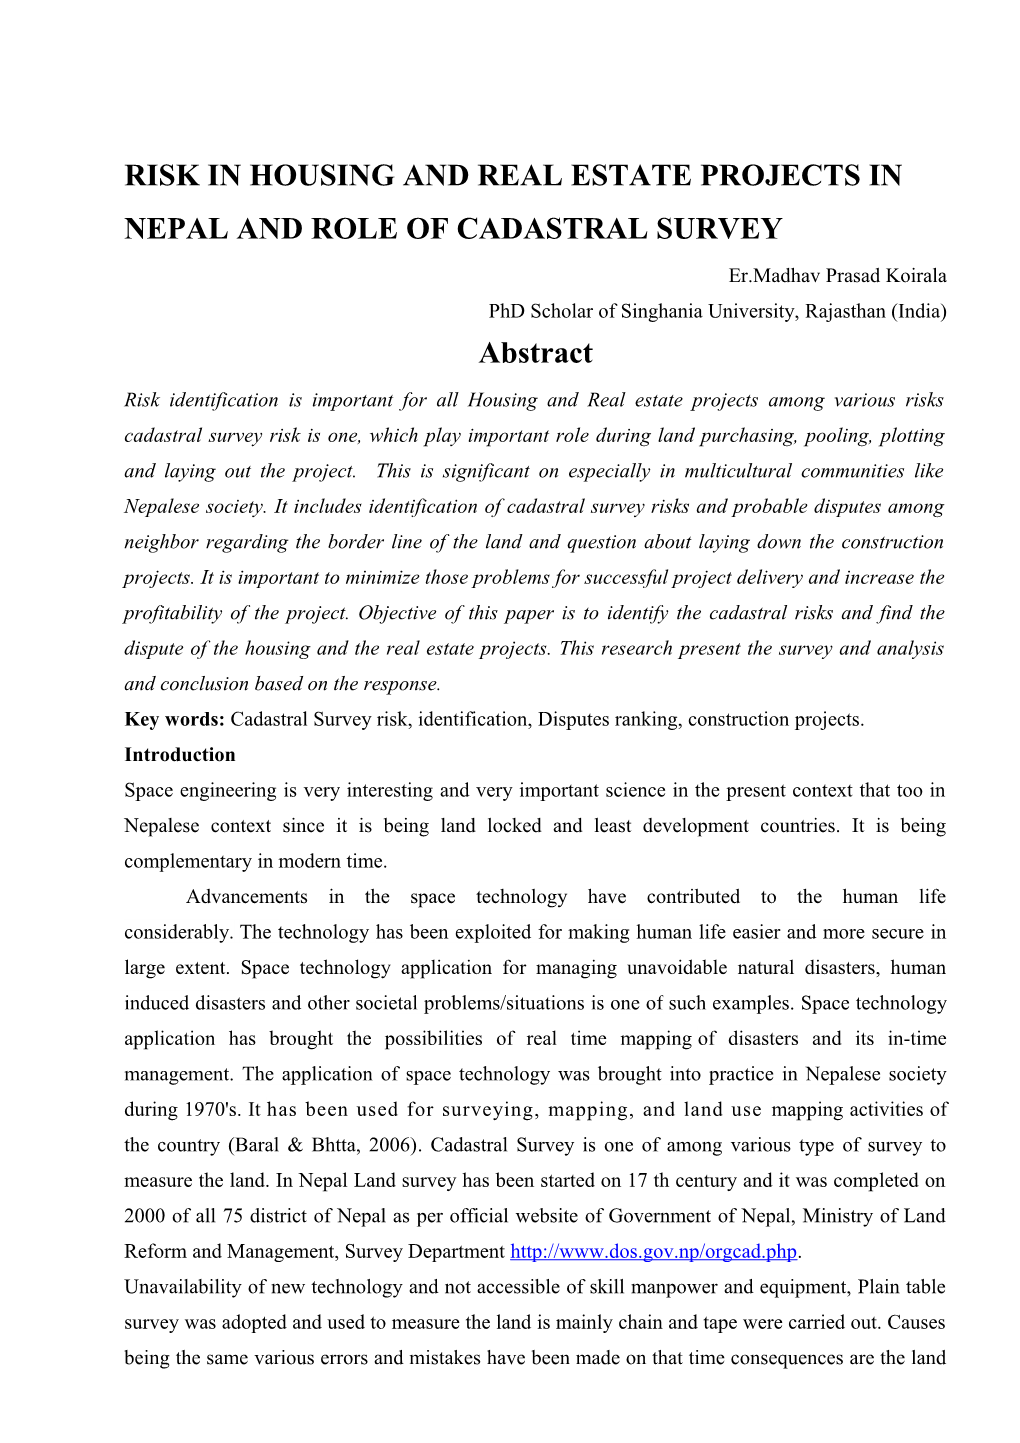 Risk in Housing and Real Estate Projects in Nepal and Role of Cadastral Survey